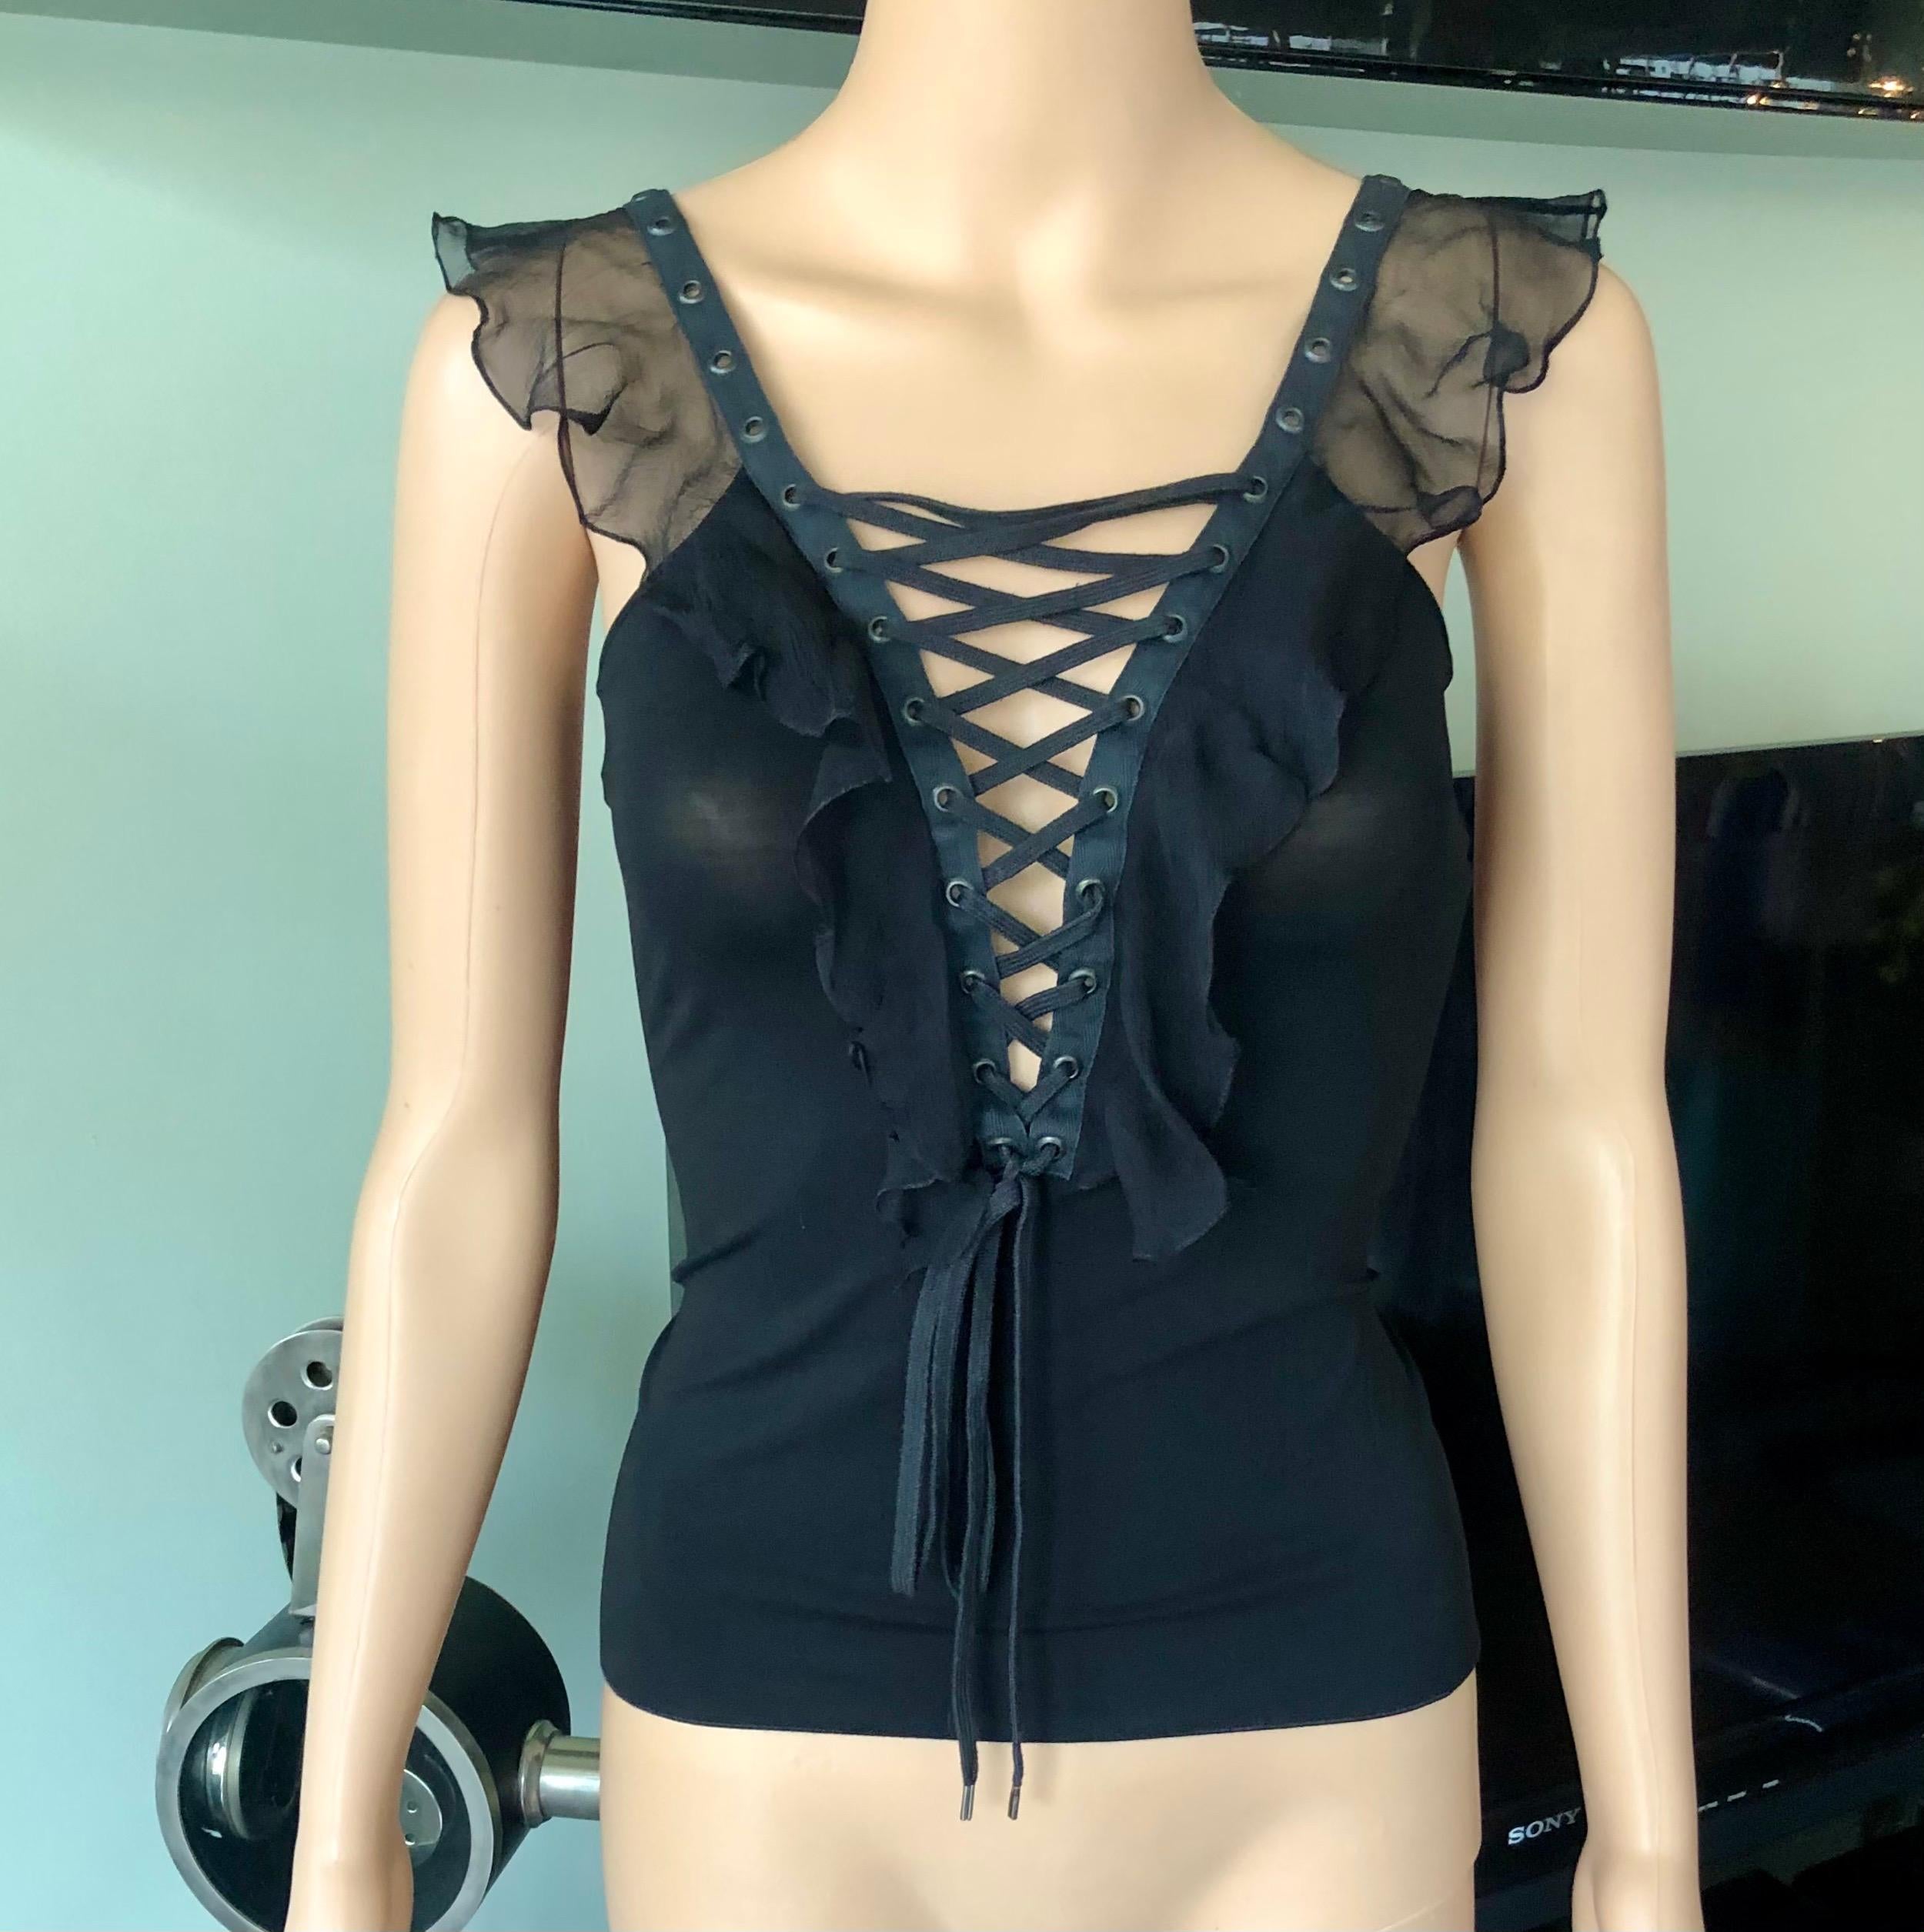 Christian Dior By John Galliano S/S 2003 Plunging Lace Up Tie Up Black Top FR 36

